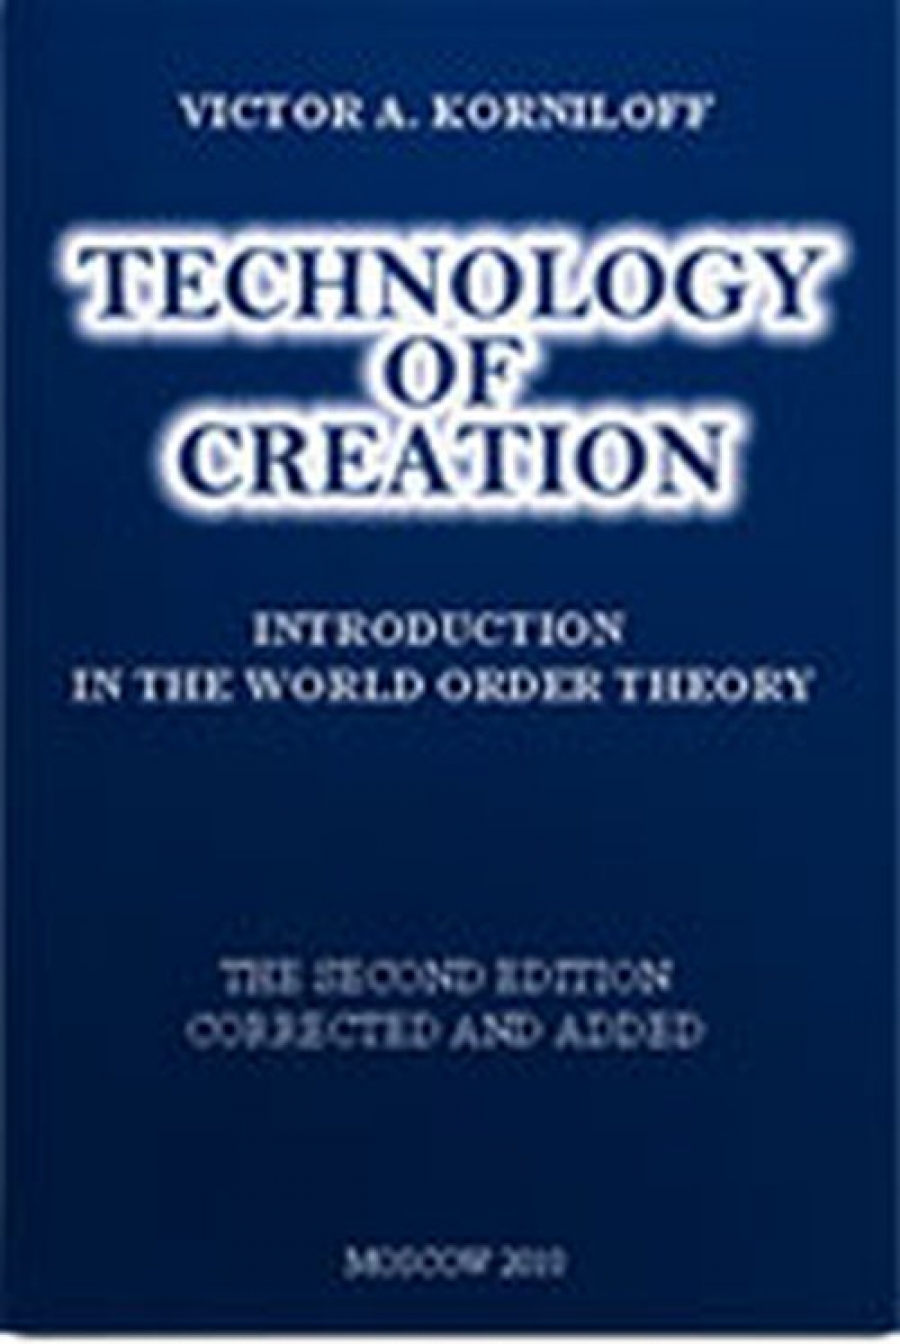  .. Technology of creation. Introduction in the world order theory 